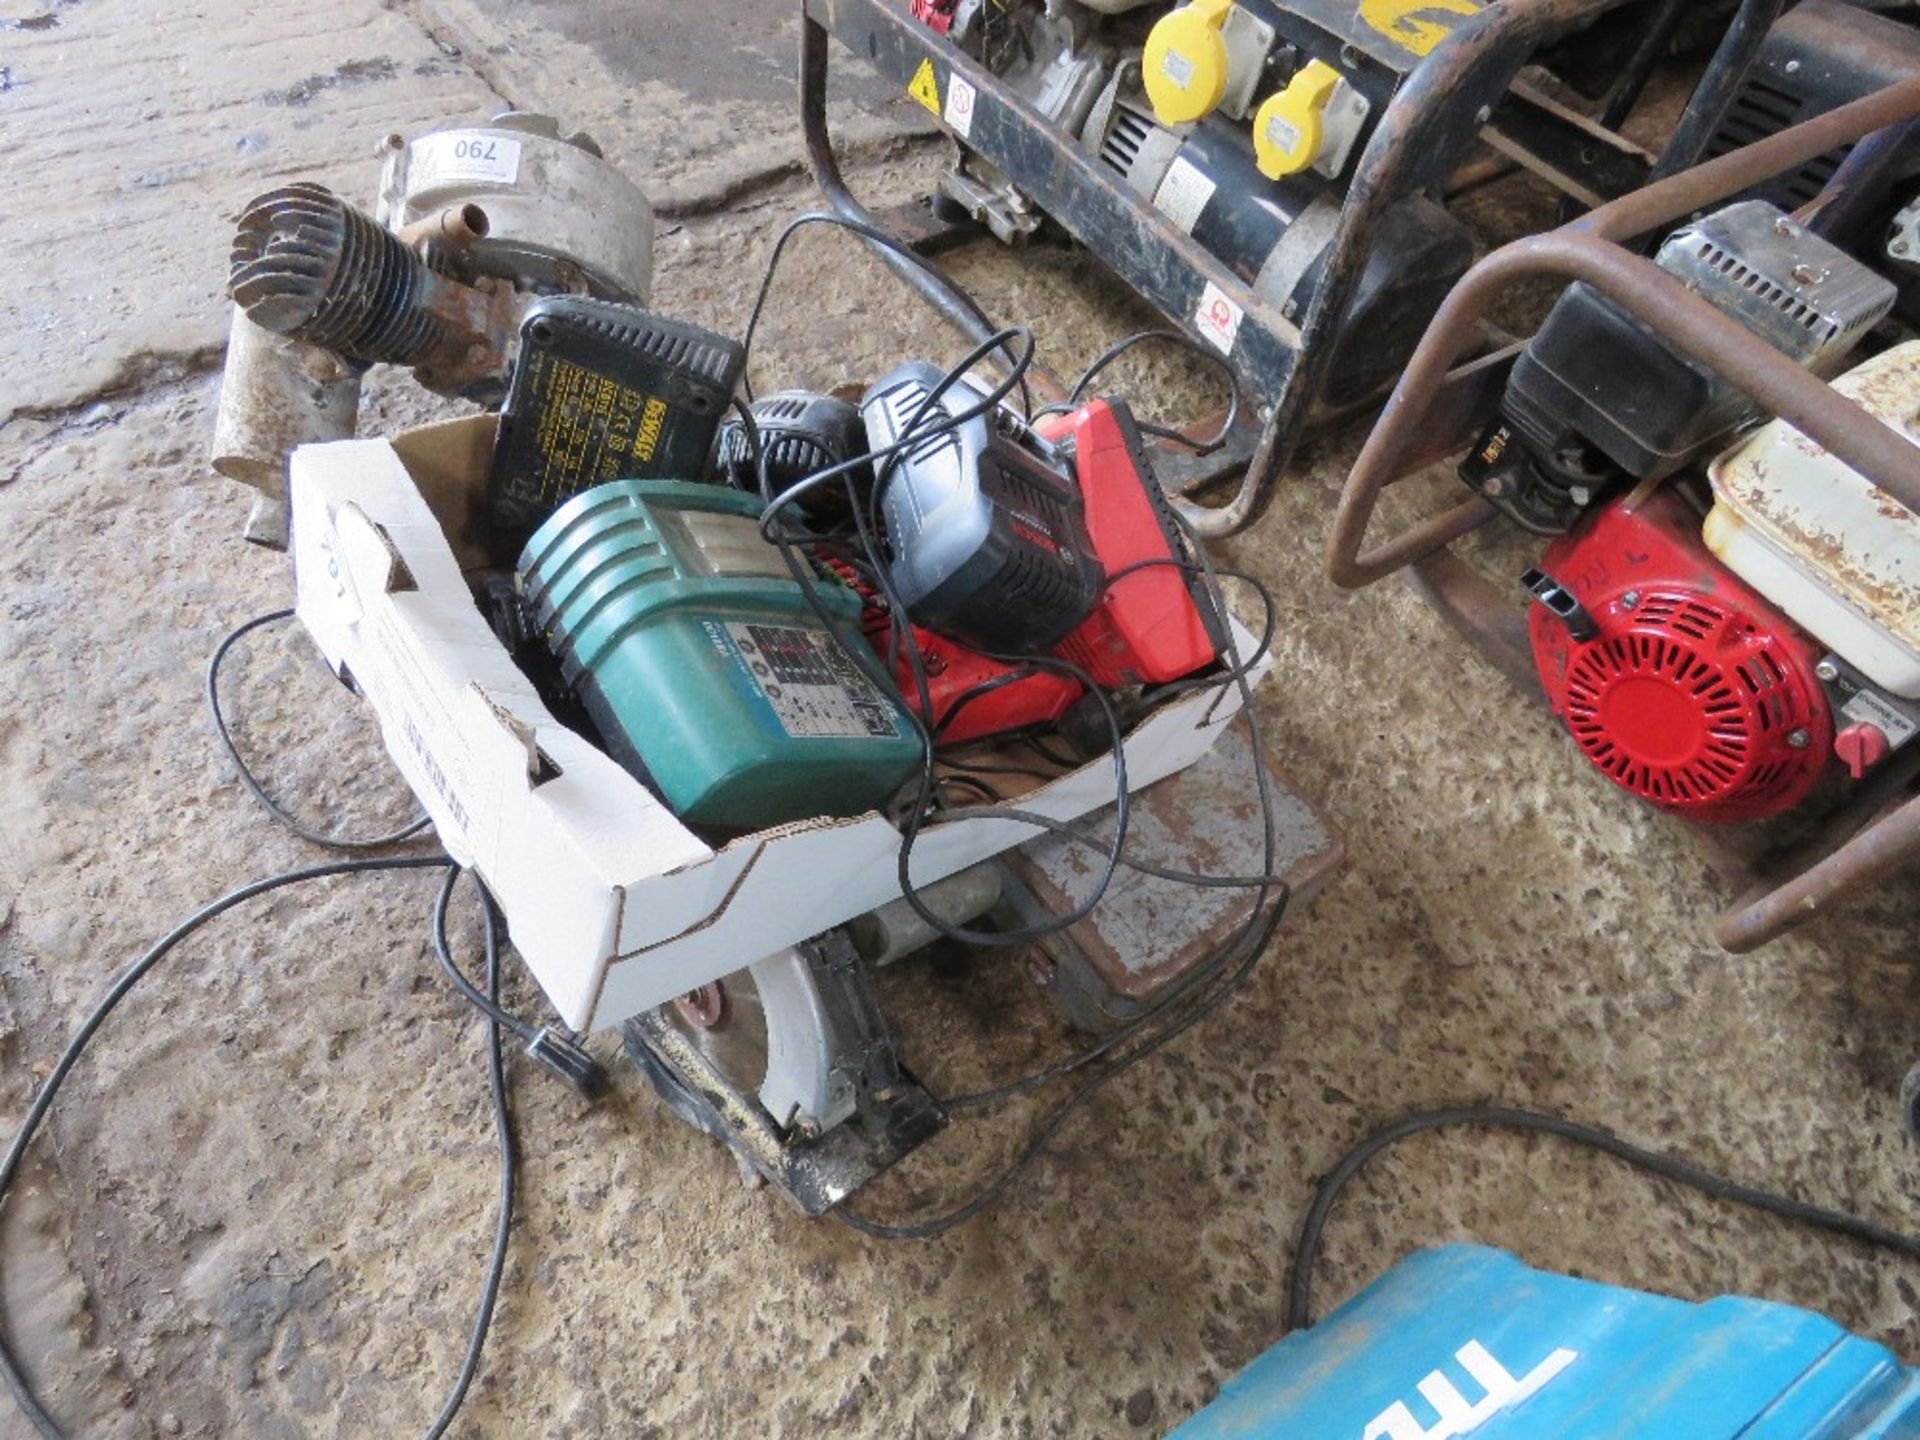 BATTERY TOOL CHARGERS PLUS 4NO 240VOLT POWER TOOLS.....THIS LOT IS SOLD UNDER THE AUCTIONEERS MARGIN